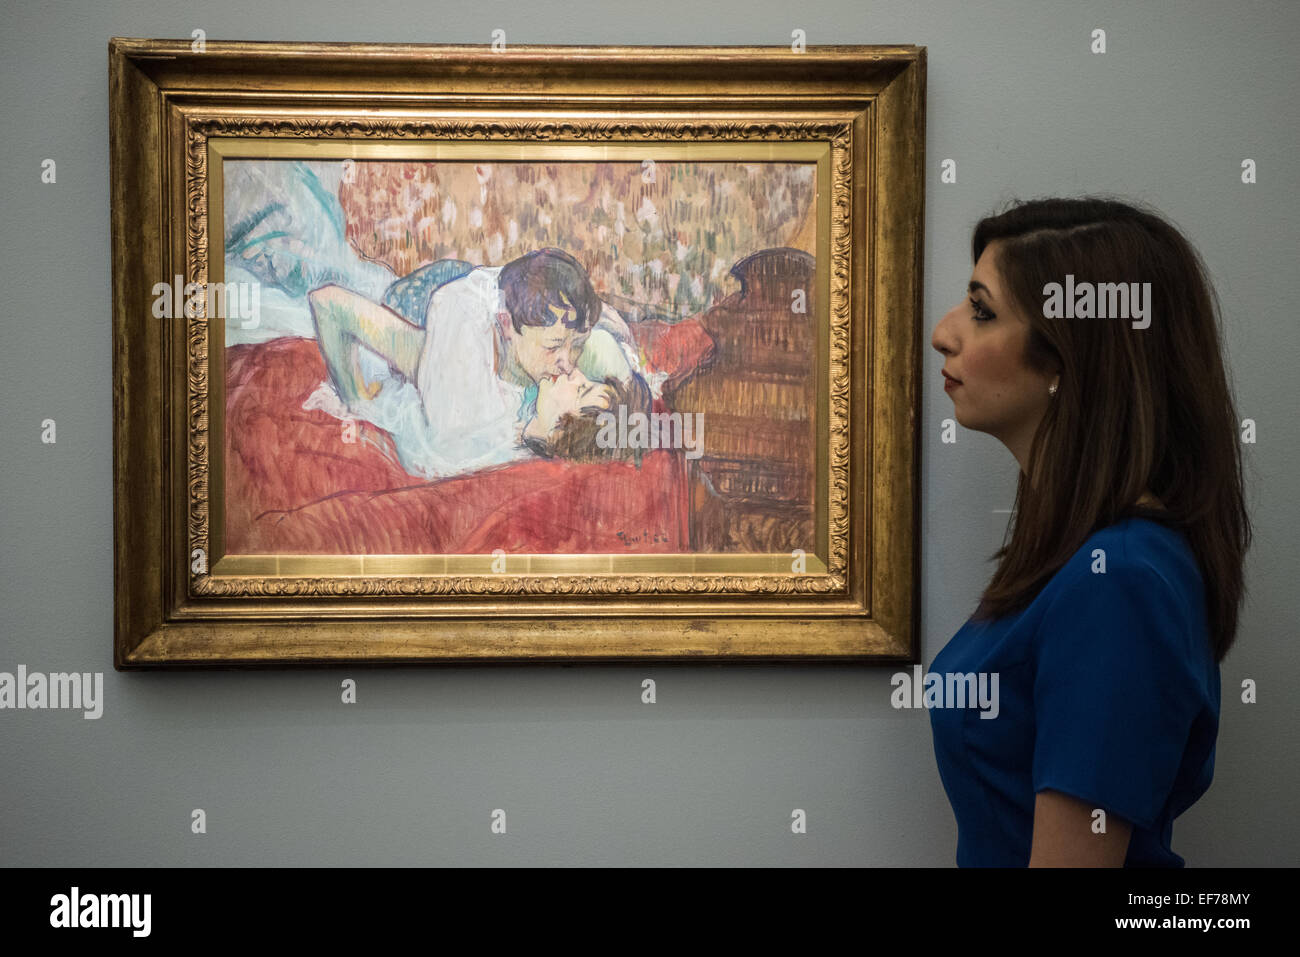 London, UK. 28th January, 2015. : a Sotheby’s employee looks at Au lit: le baiser (£9-12 million) by Henri de Toulouse-Lautrec during the press view of the Impressionist & Modern, Surrealist and Contemporary Art sale together estimated at over £233 million Credit:  Piero Cruciatti/Alamy Live News Stock Photo